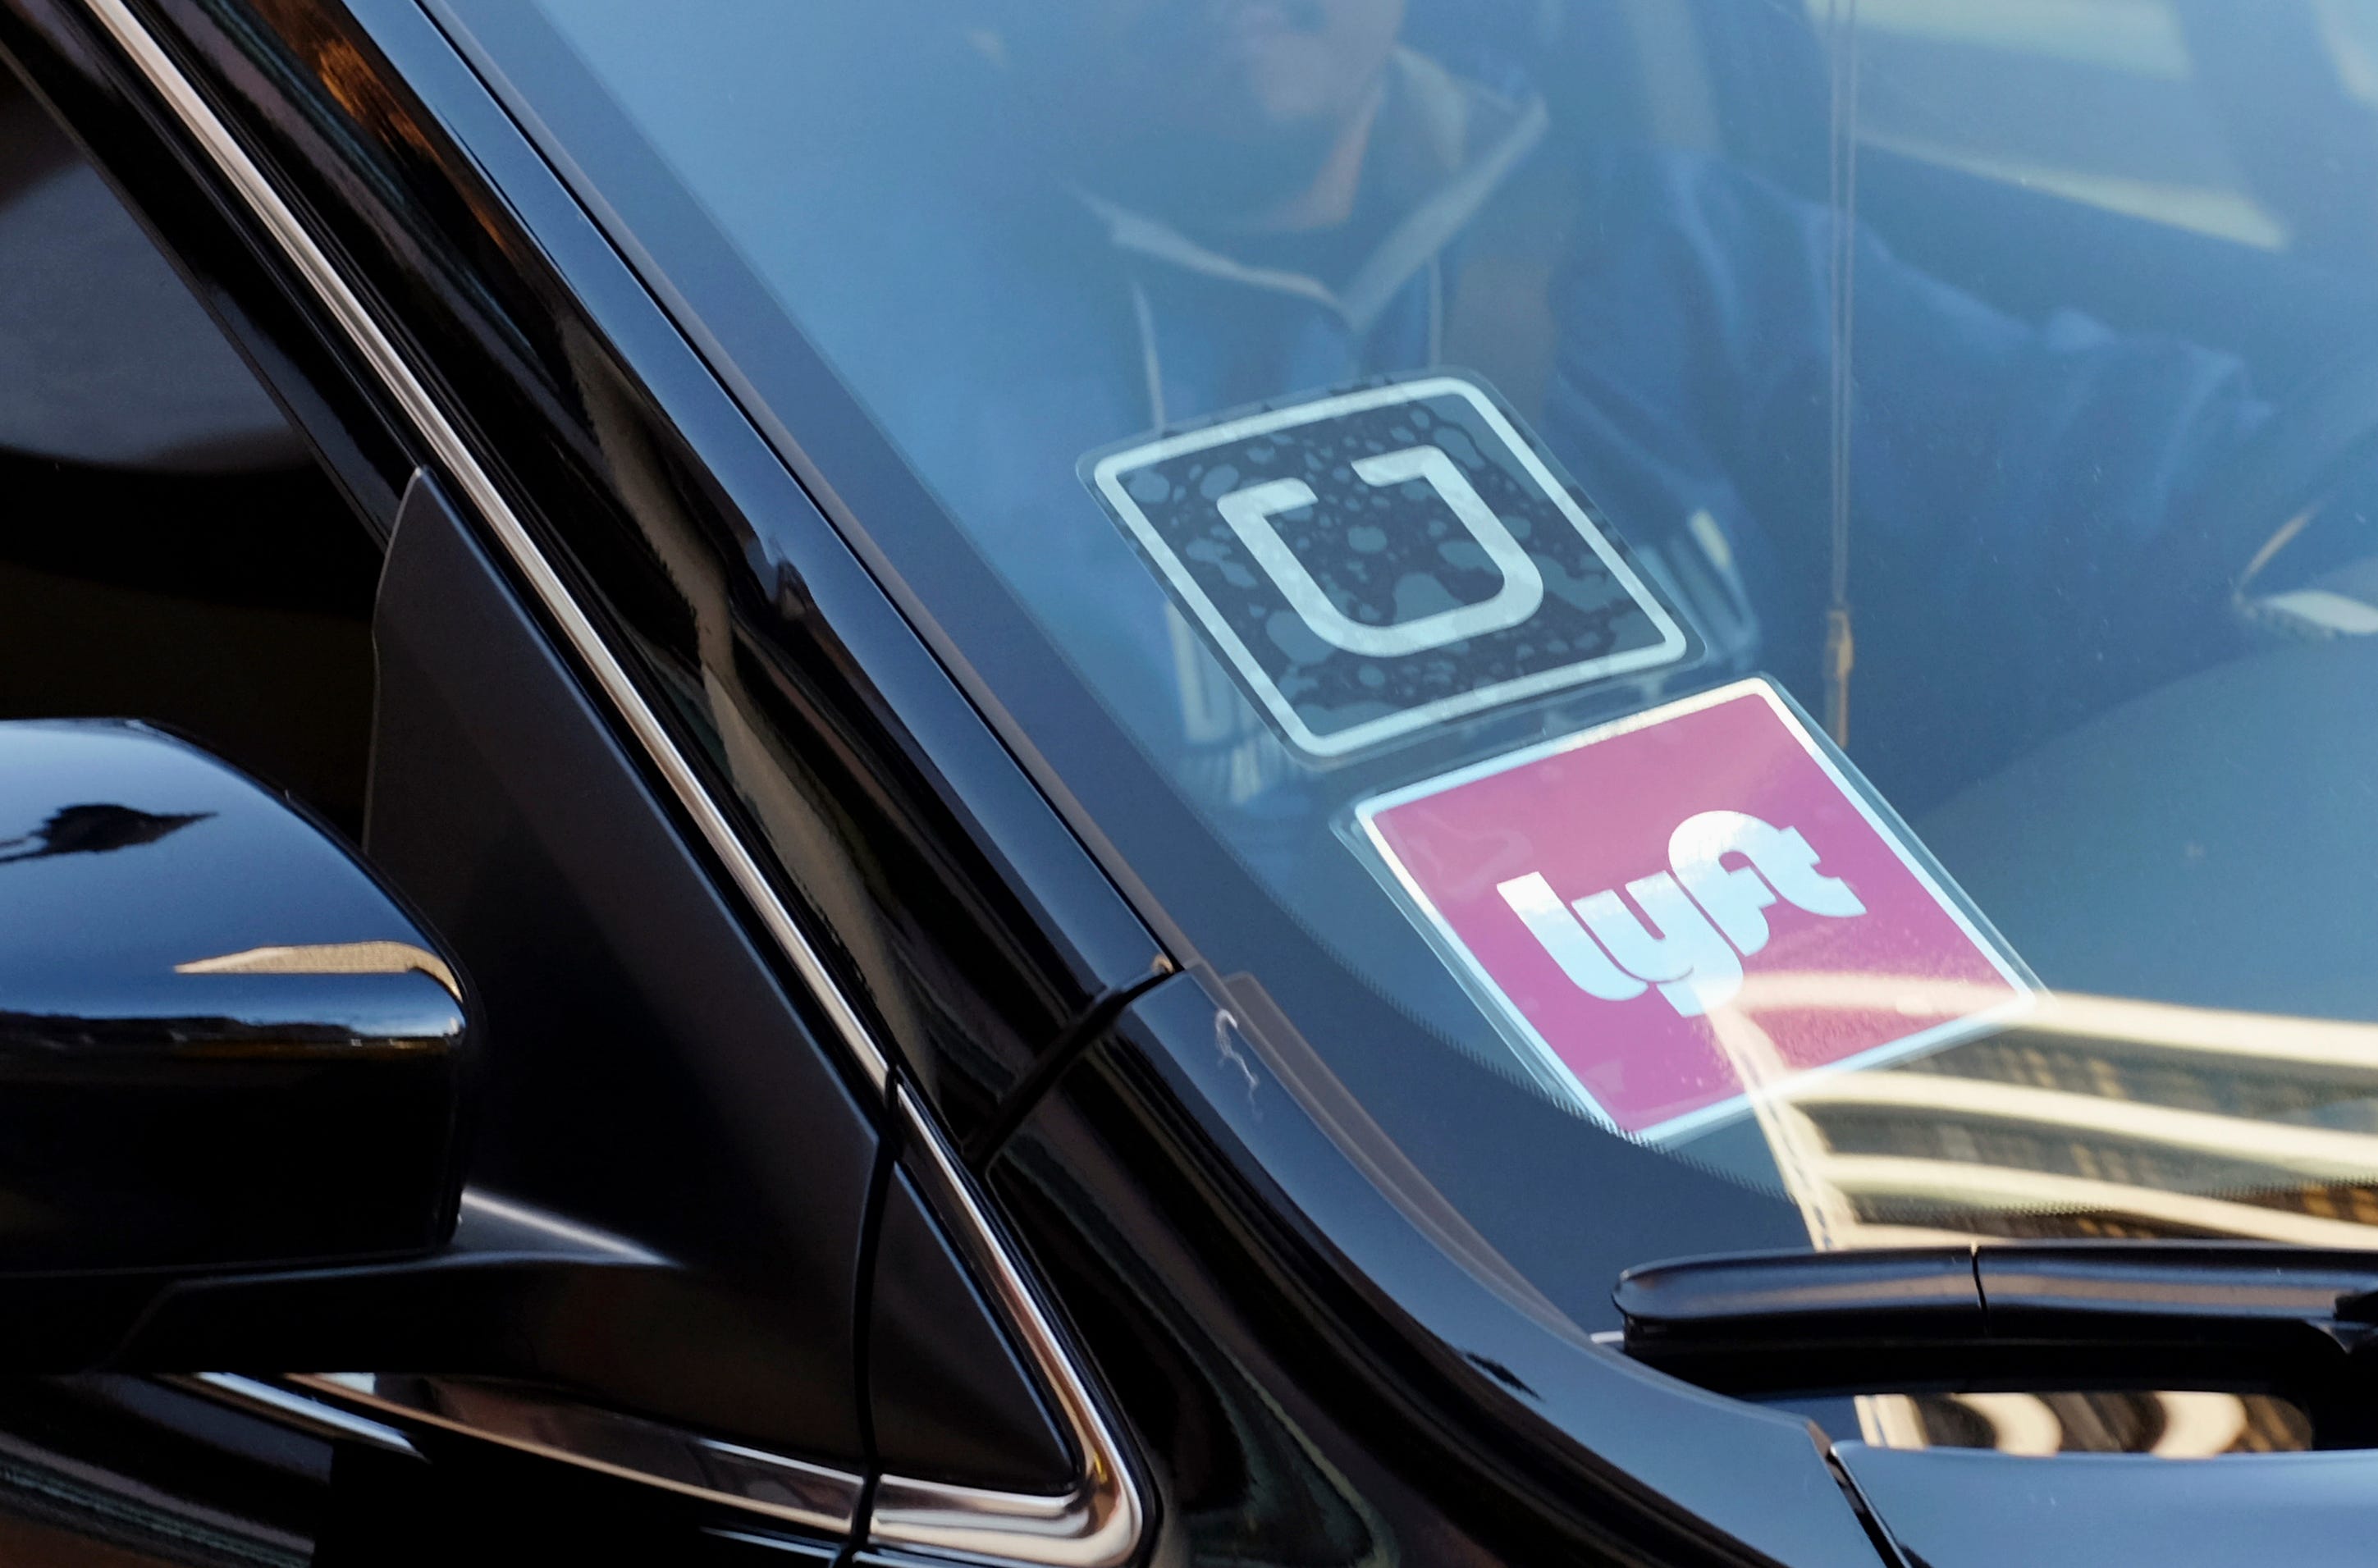 NYC Council OKs license freeze that could make Uber, Lyft more expensive, harder to find